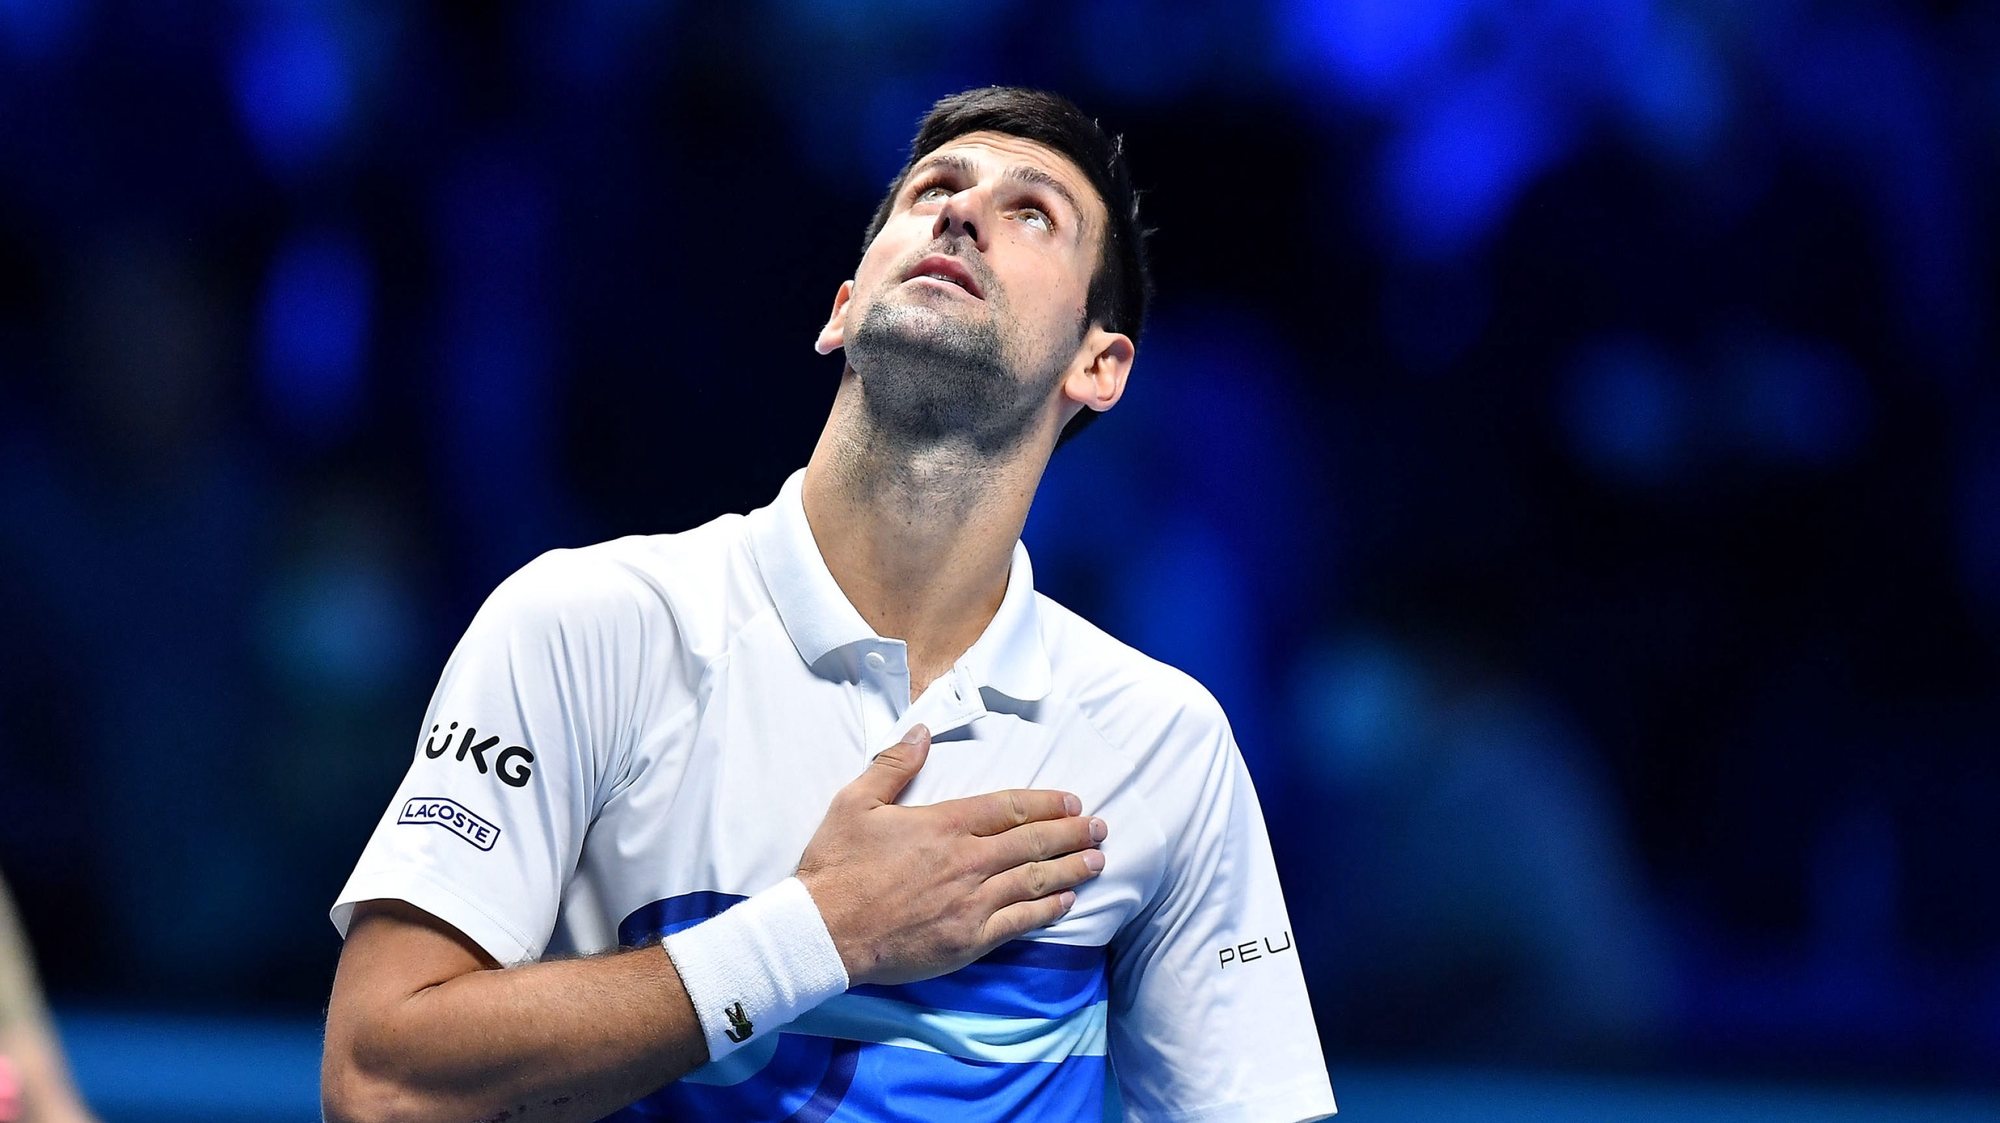 epa09688749 (FILE) - Novak Djokovic of Serbia reacts after defeating Casper Ruud of Norway in their group stage match of the Nitto ATP Finals tennis tournament in Turin, Italy, 15 November 2021 (reissued 16 January 2022). Djokovic lost court appeal against deportation from Australia and will not be able to defend his Australian Open title in Melbourne.  EPA/Alessandro Di Marco *** Local Caption *** 57295242